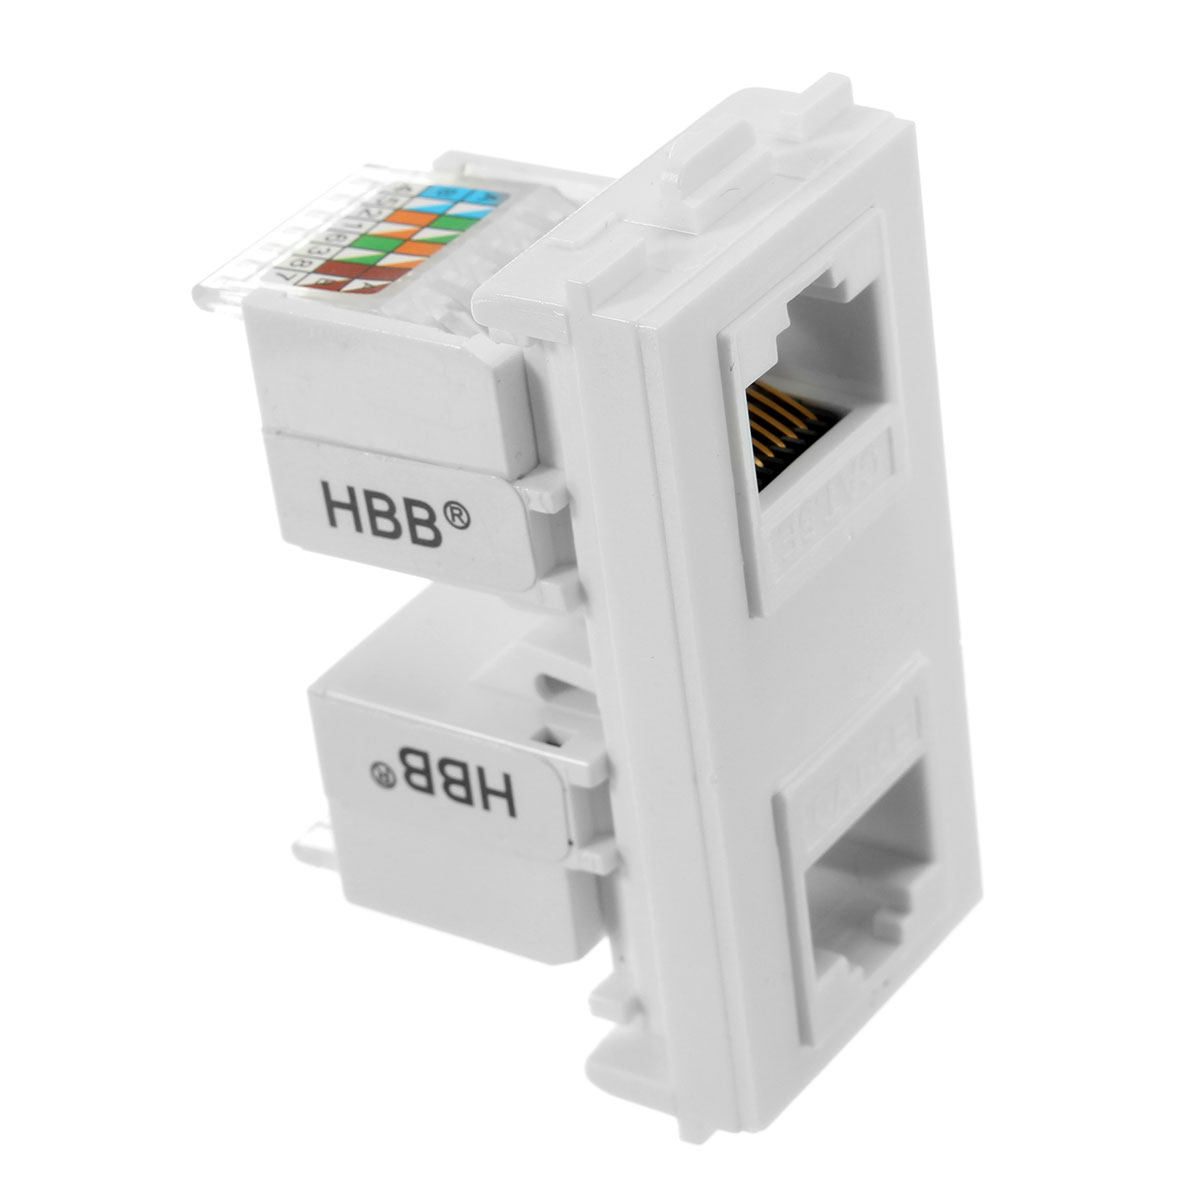 RJ45-Wall-Plate-Dual-Port-Socket-Panel-Building-Materials-Network-Combination-Connector-Module-1401148-8